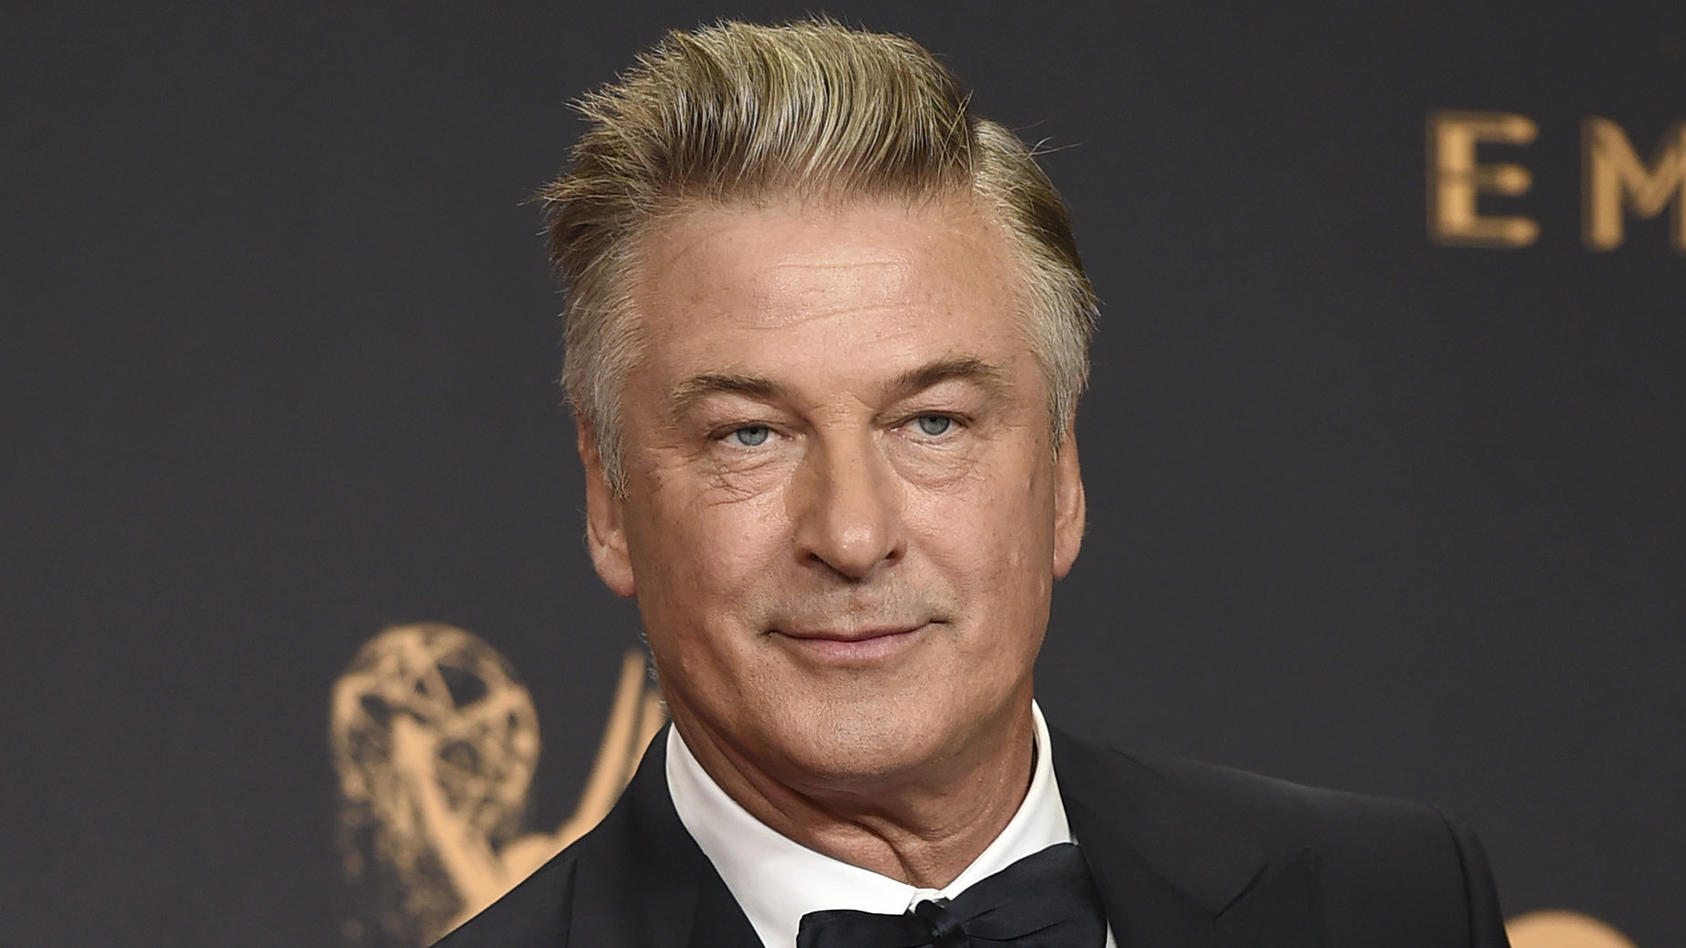 FILE - Alec Baldwin poses in the press room with the award for outstanding supporting actor in a comedy series for "Saturday Night Live" at the 69th Primetime Emmy Awards in Los Angeles on Sept. 17, 2017. The family of a cinematographer shot and kill